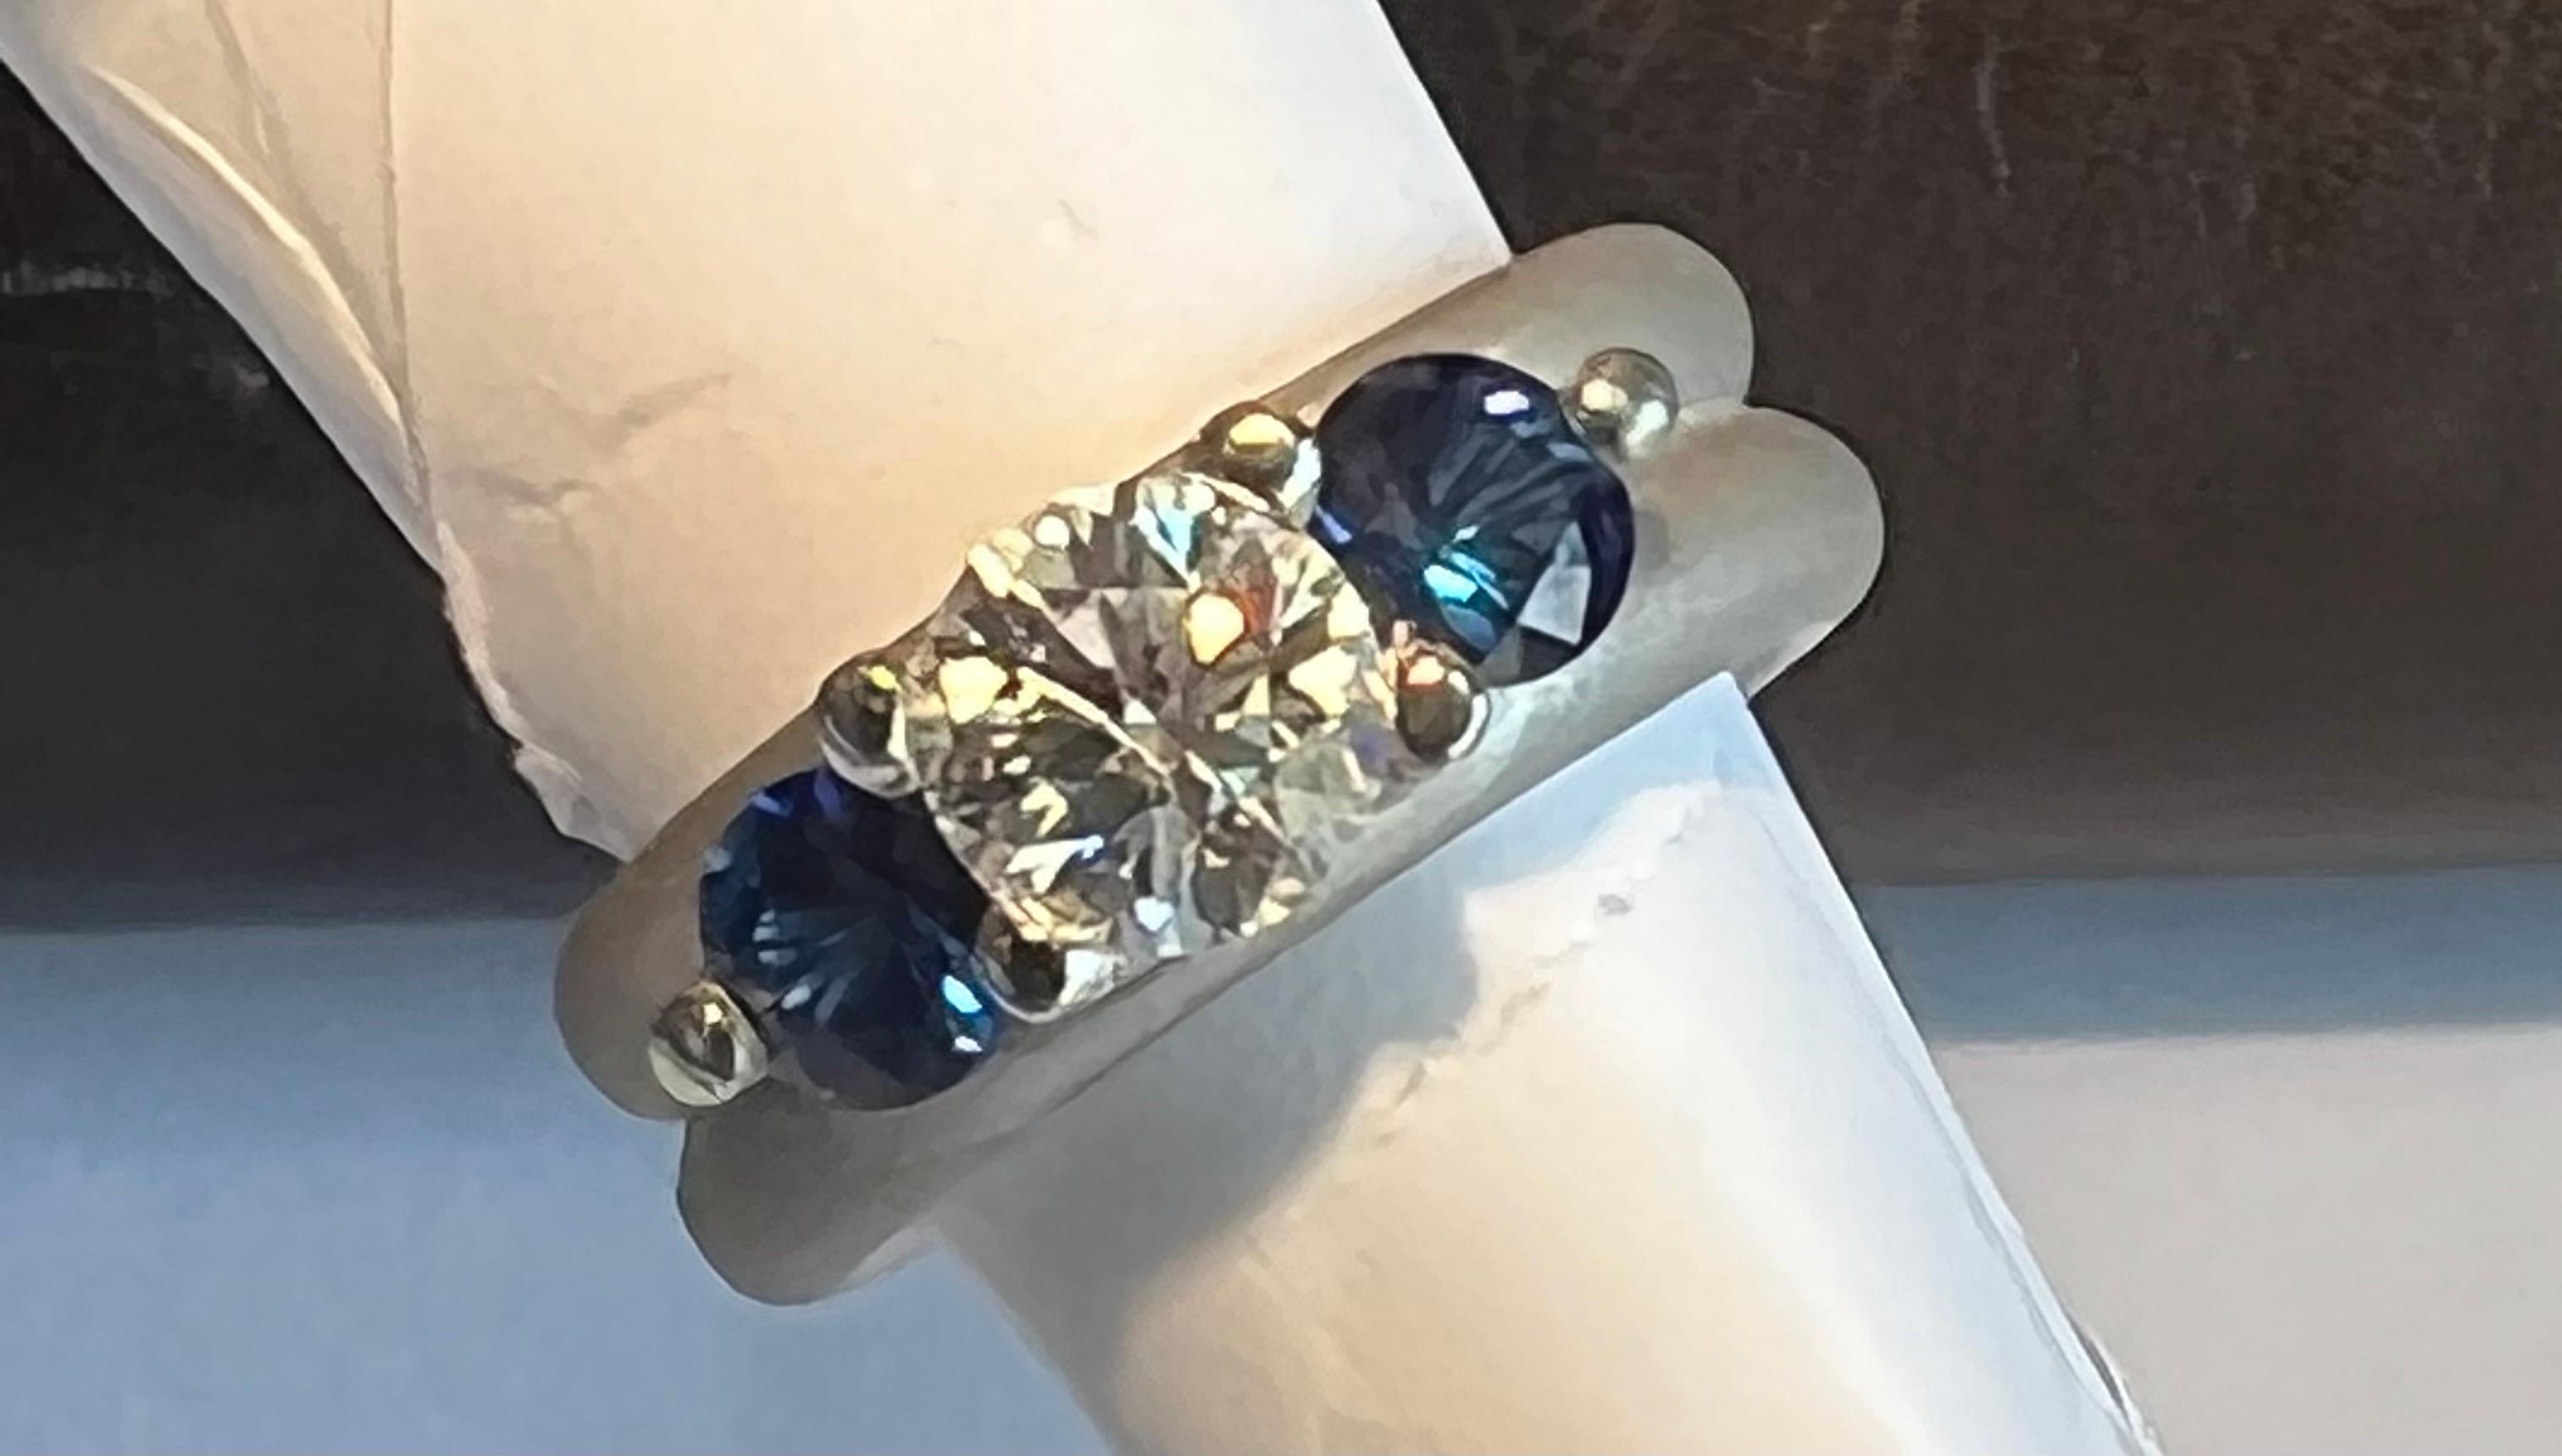 1.08ct round diamond, FG color, VS2 clarity prong set with two round blue sapphires weighing 1.22cts, in brushed satin finish platinum mounting, 7mm width, finger size 6, may be sized.
Original retail $10850